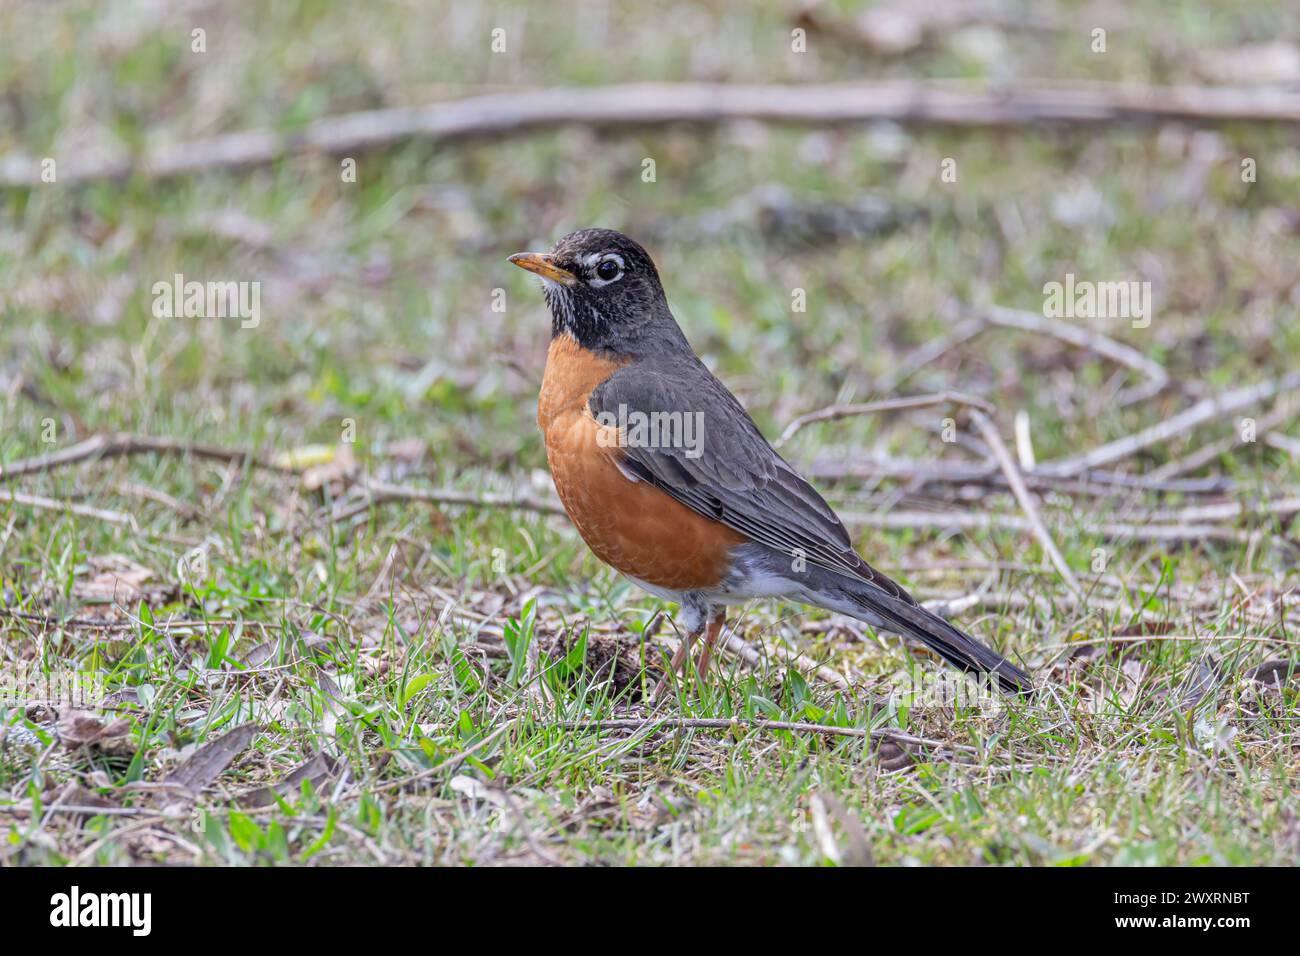 An American robin bird perched on the grass. Stock Photo